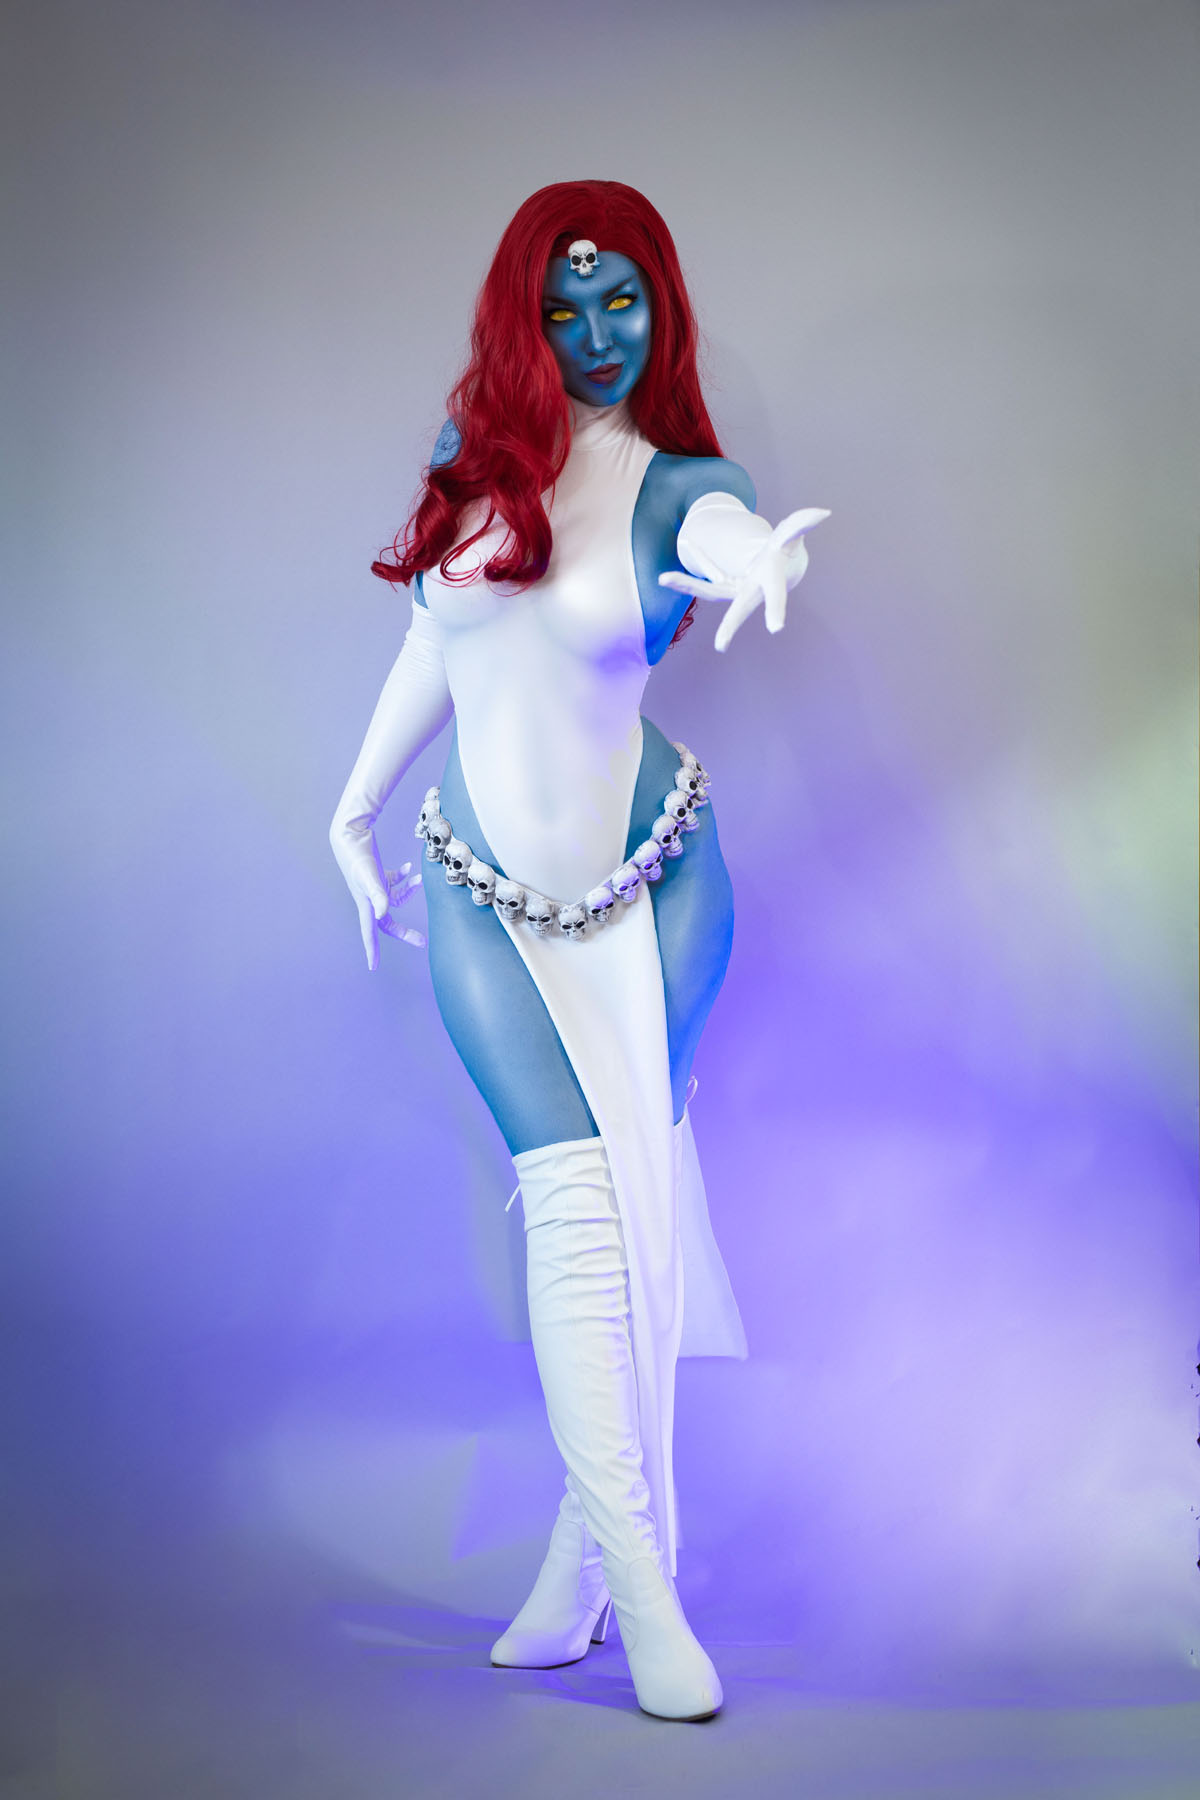 Mystique Cosplay Part 2: Wearing the Costume #2